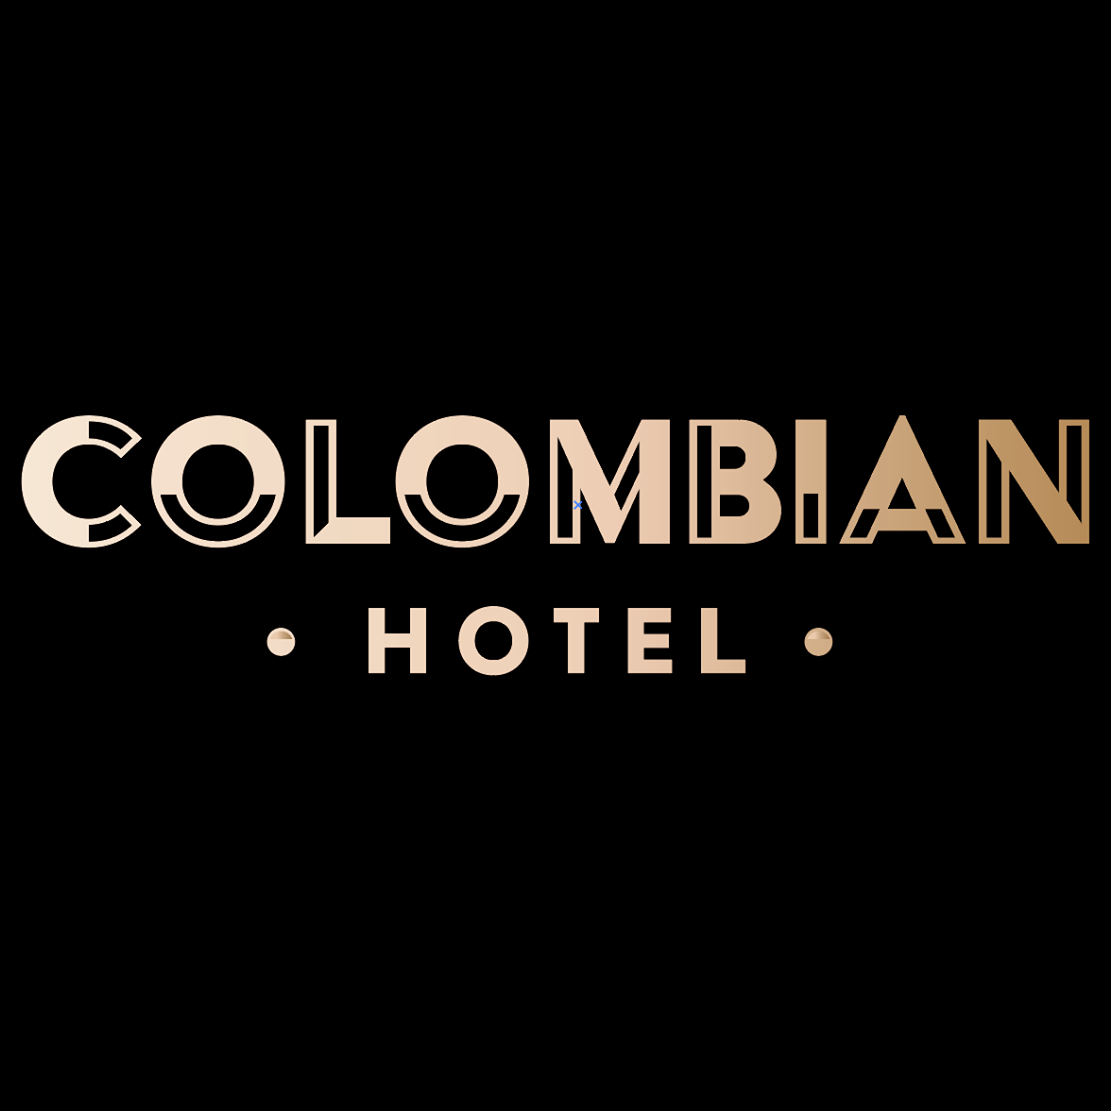 The Colombian Hotel